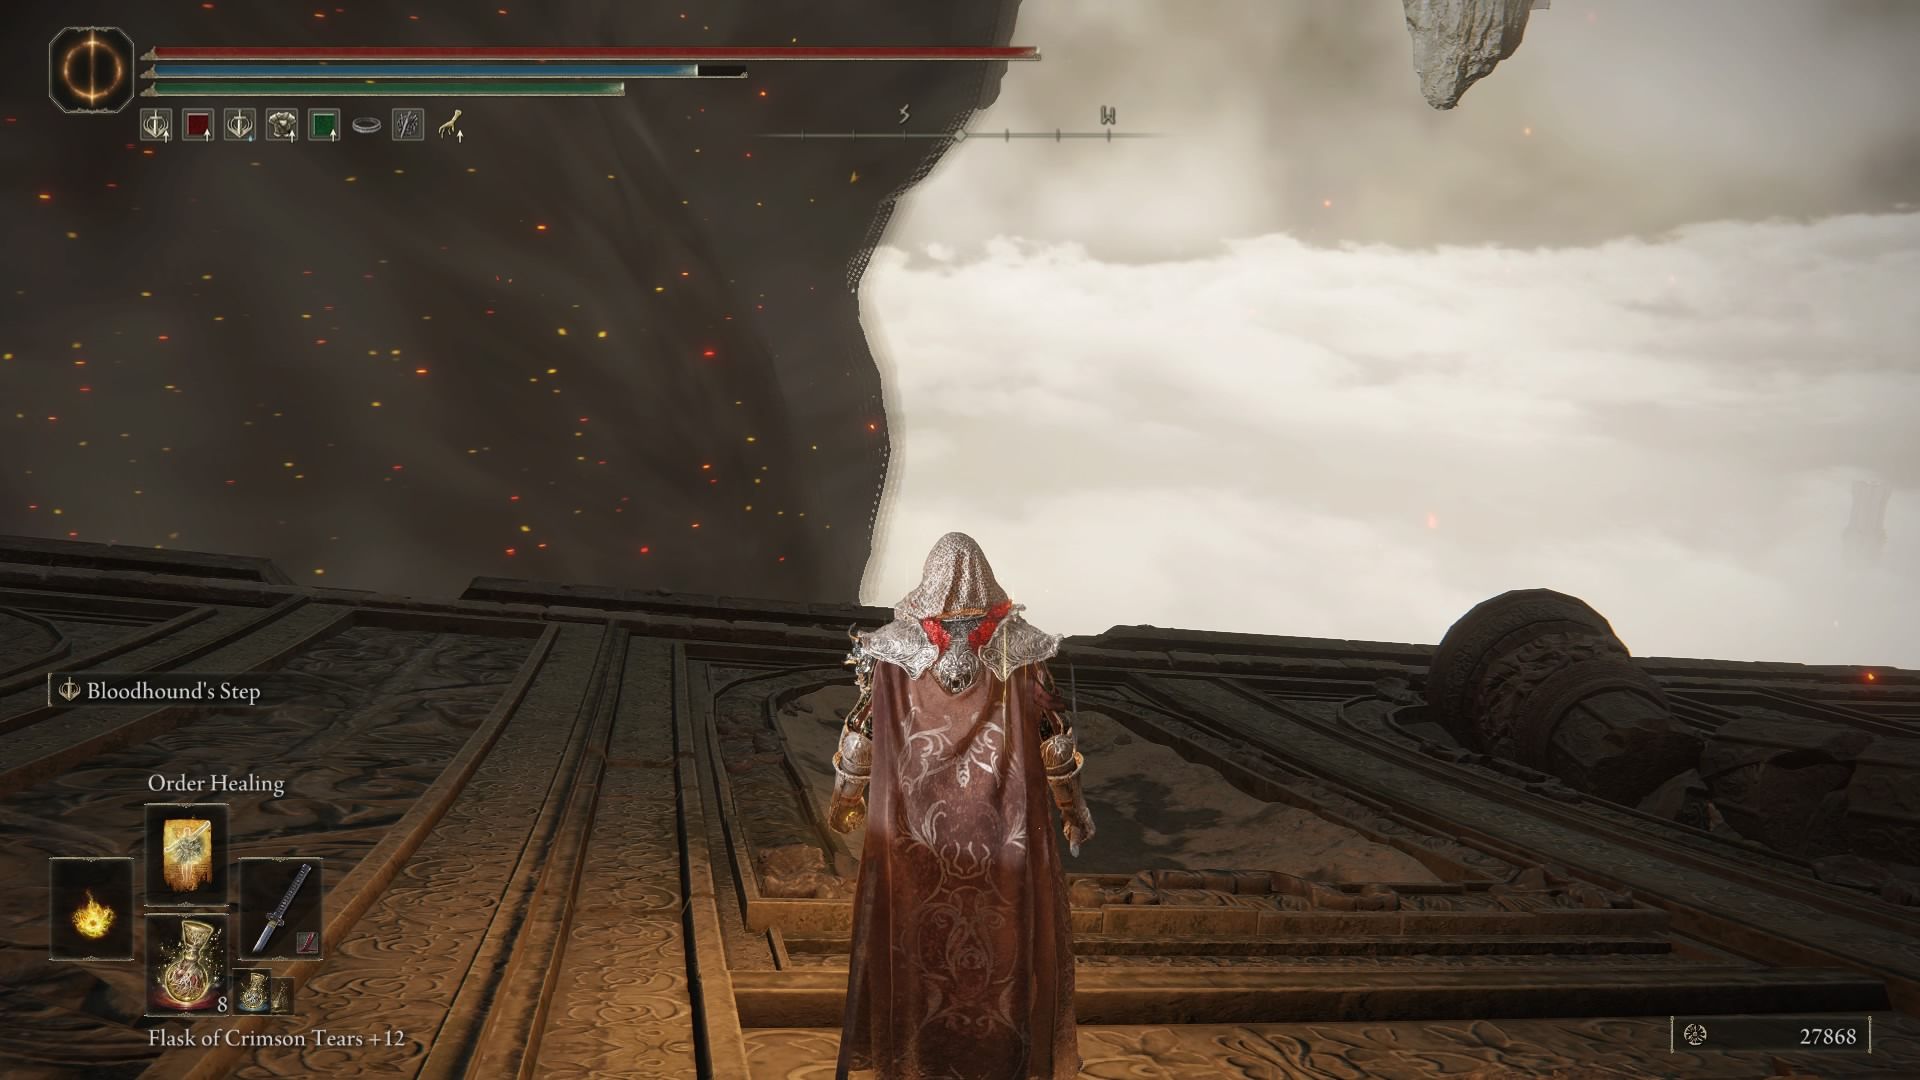 The player about to lie down on the ground for the cutscene to play.